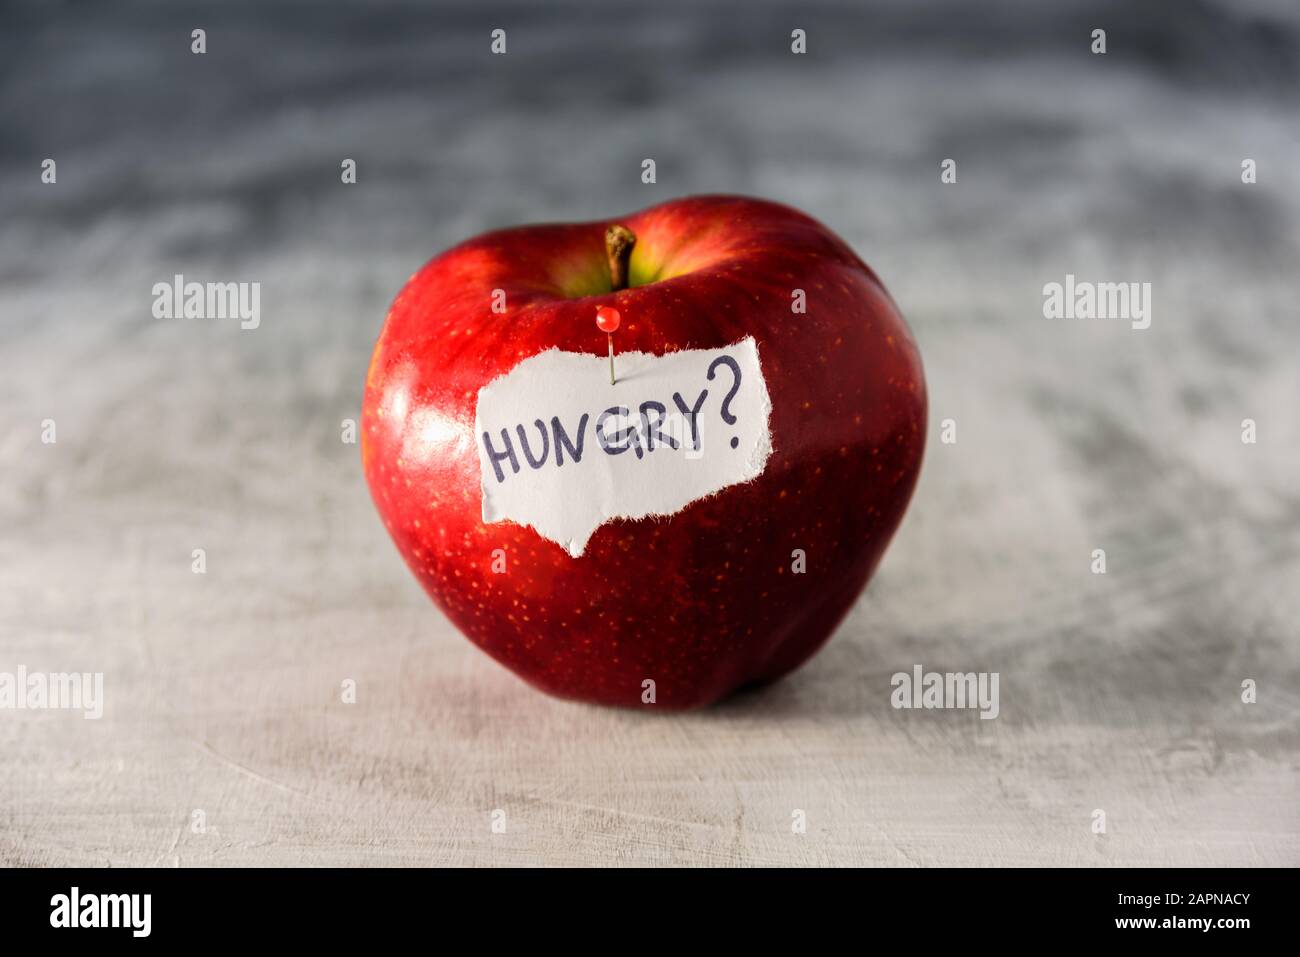 Big red apple on grey background. Dieting and weight loss concept Stock Photo